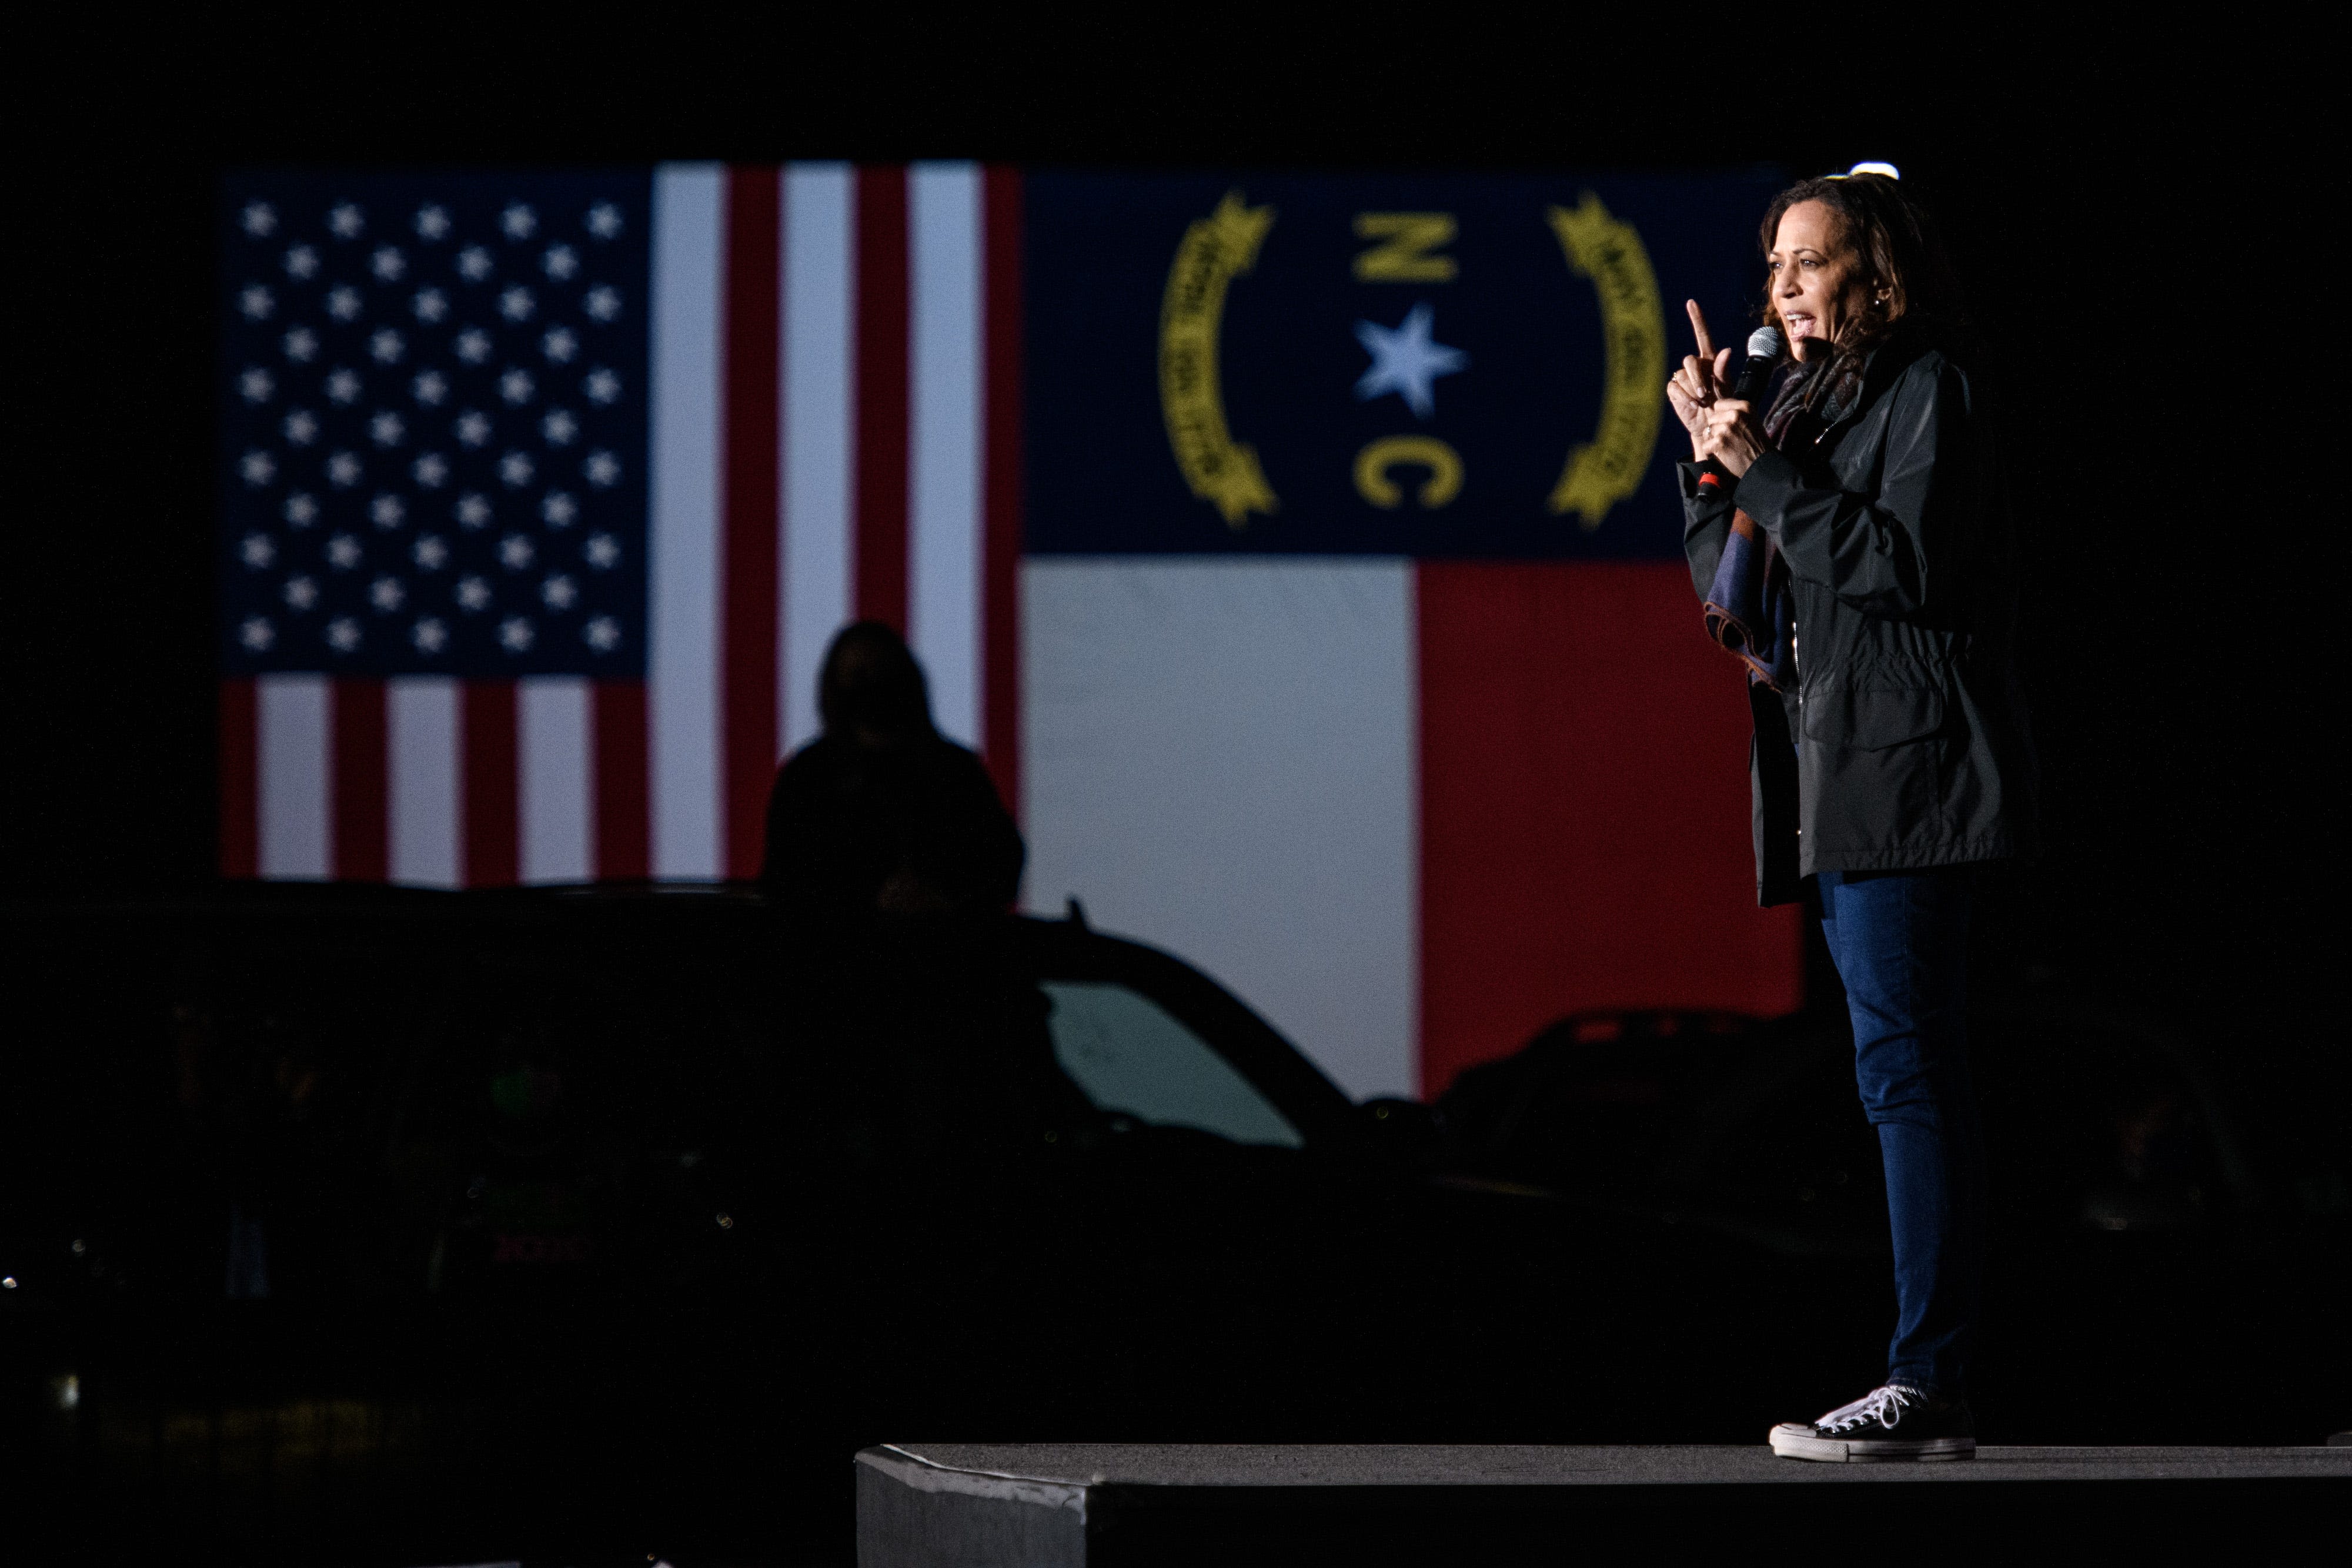 Vice President Kamala Harris to visit Fayetteville this week. Here's what we know